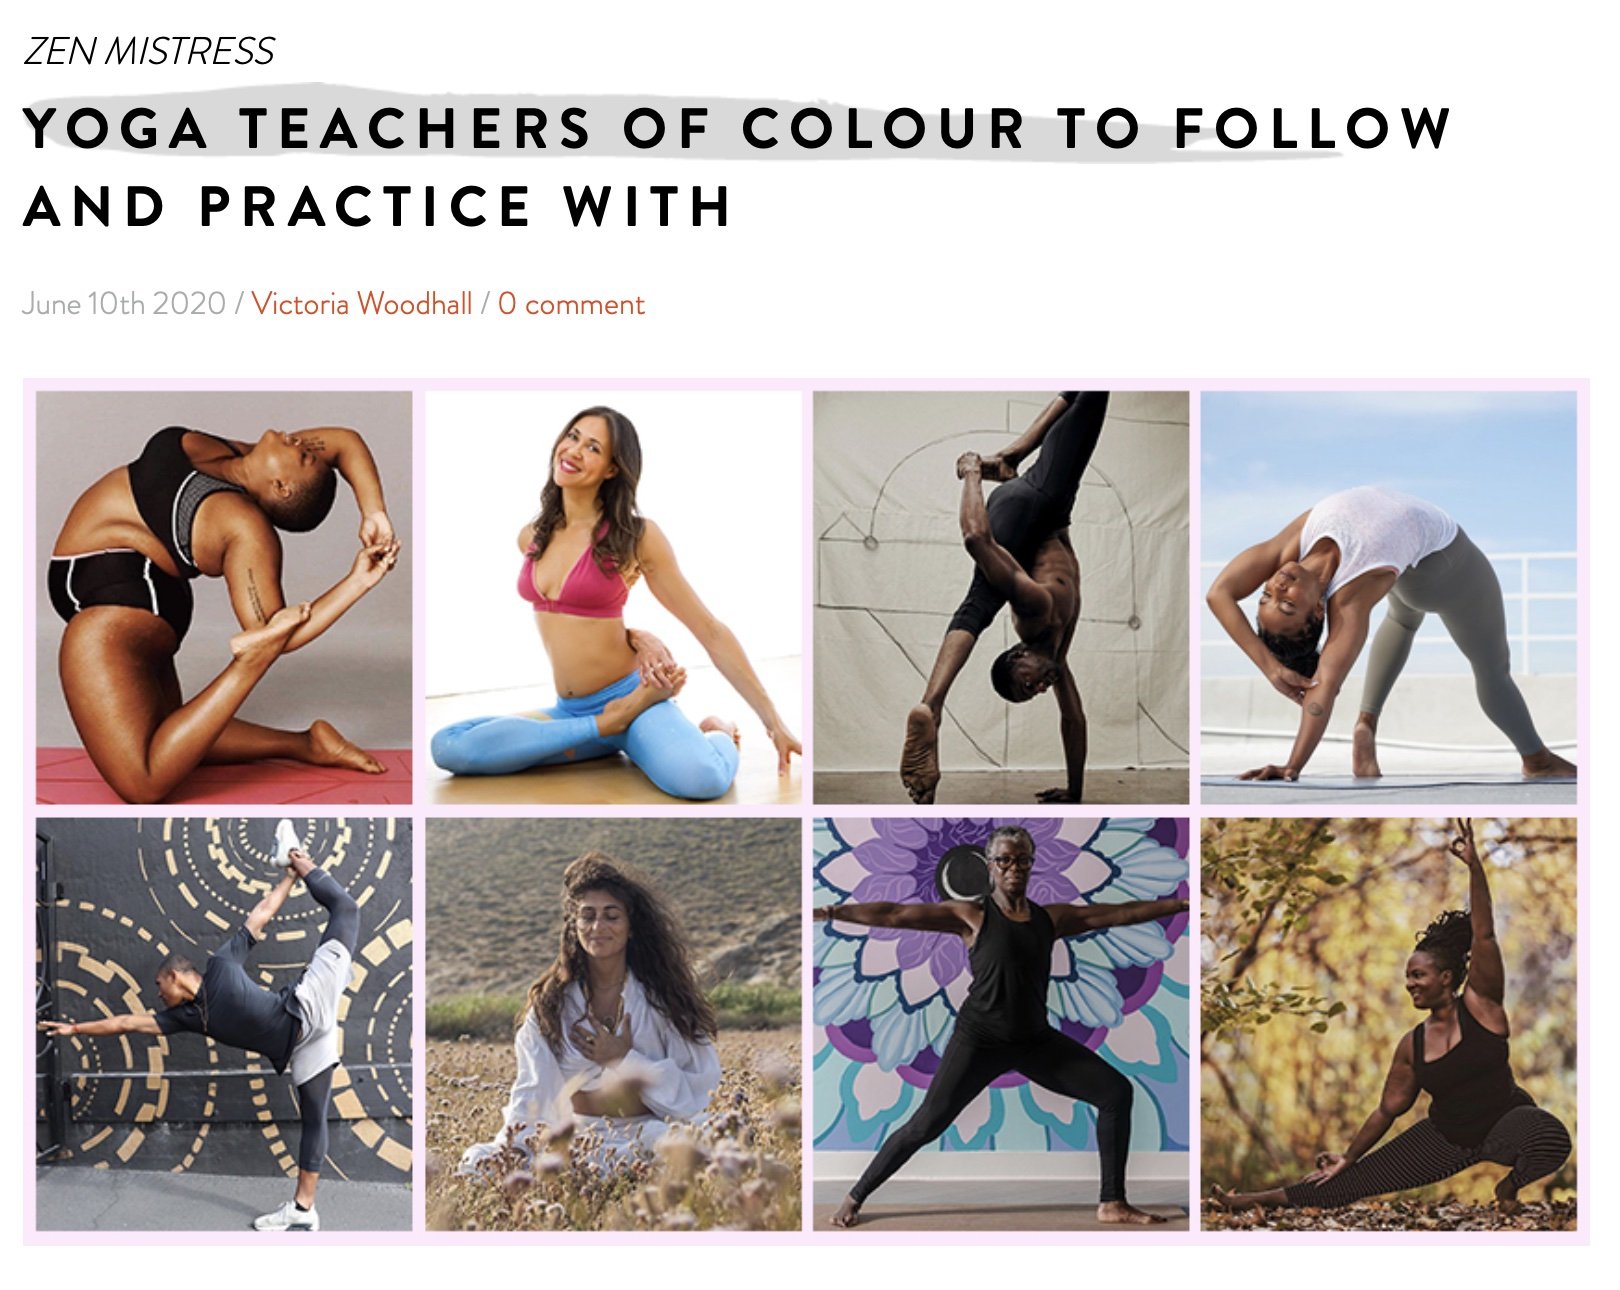 Yoga teachers of colour to follow and practice with